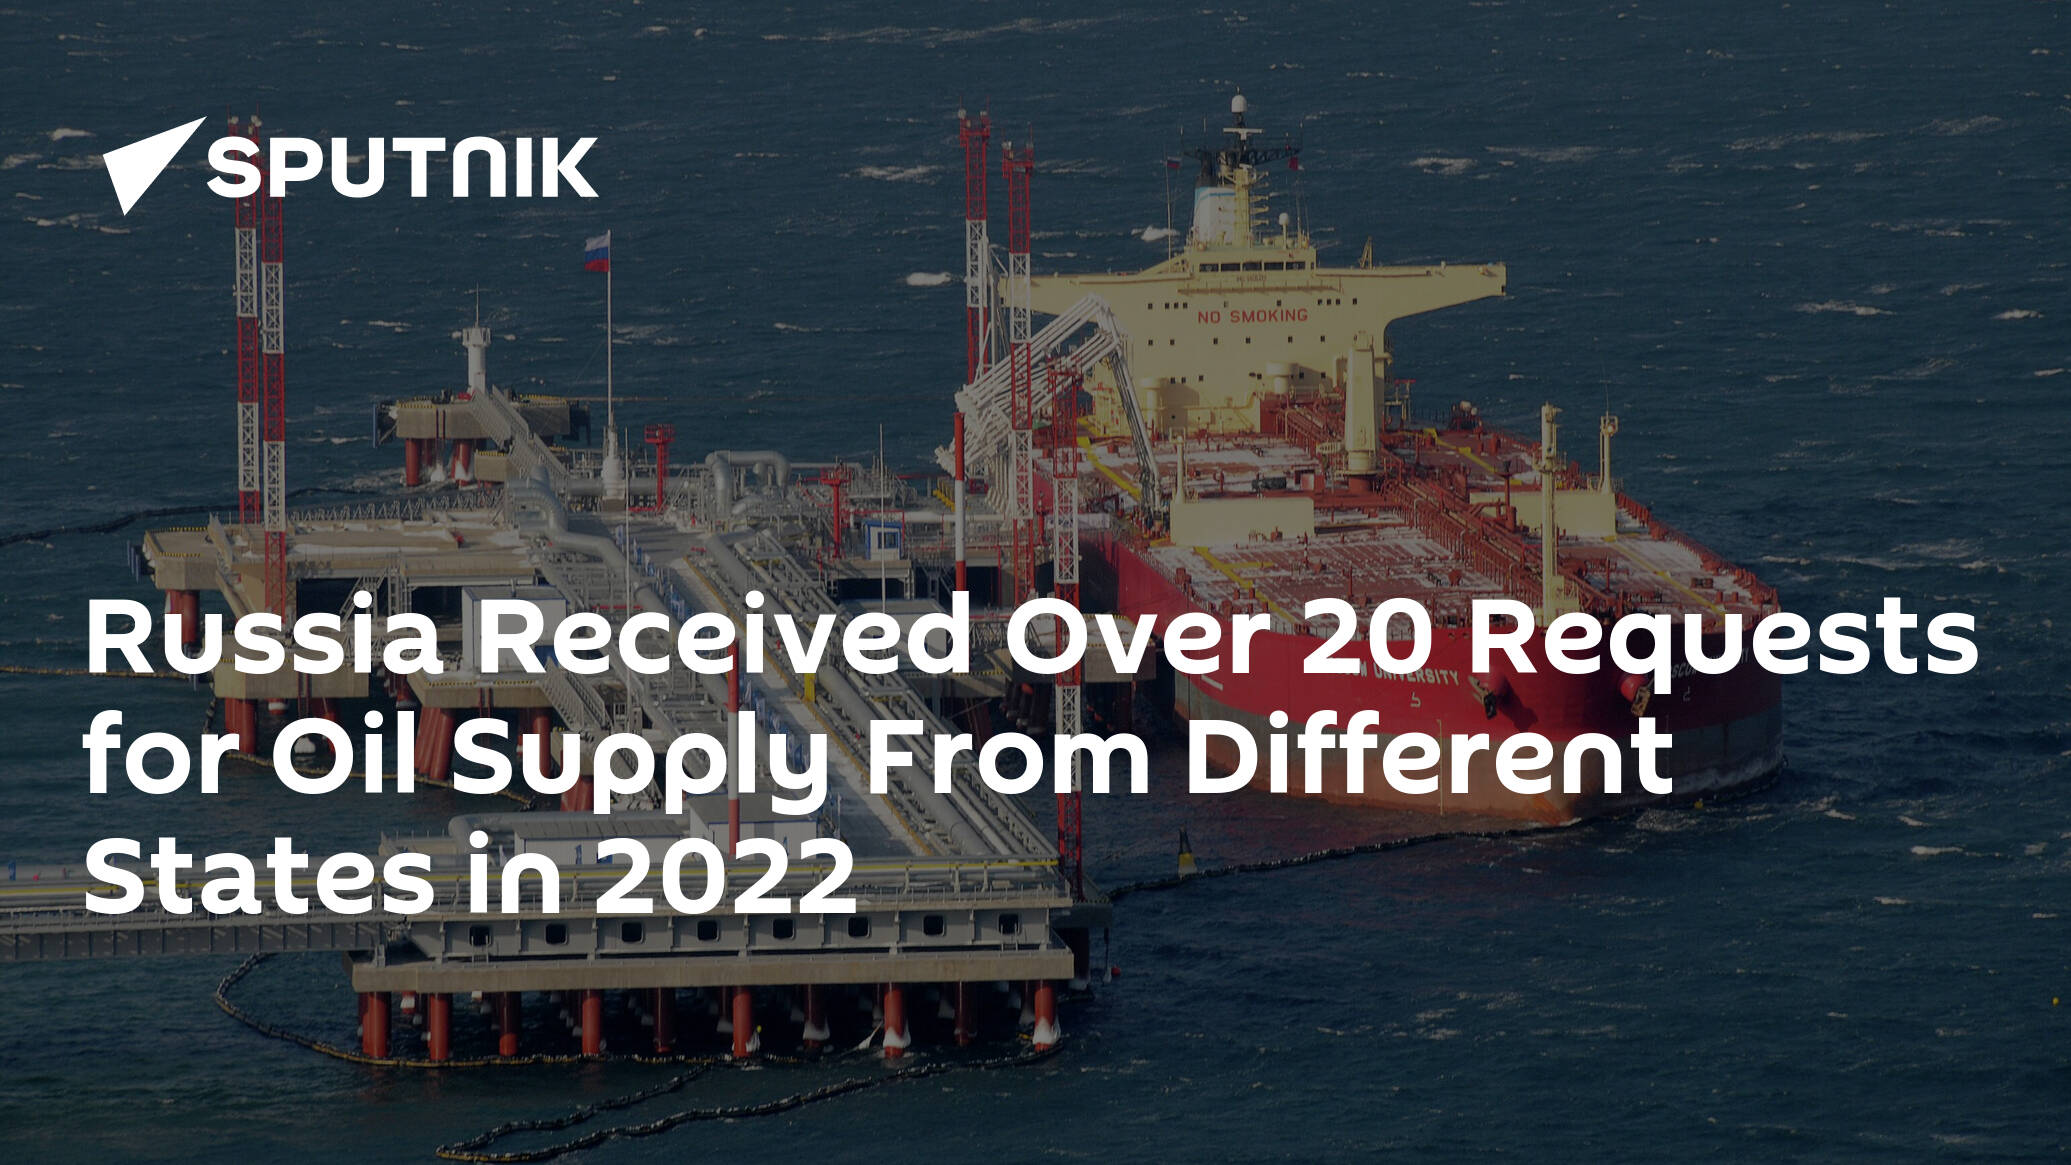 Russia Received Over 20 Requests for Oil Supply From Different States in 2022